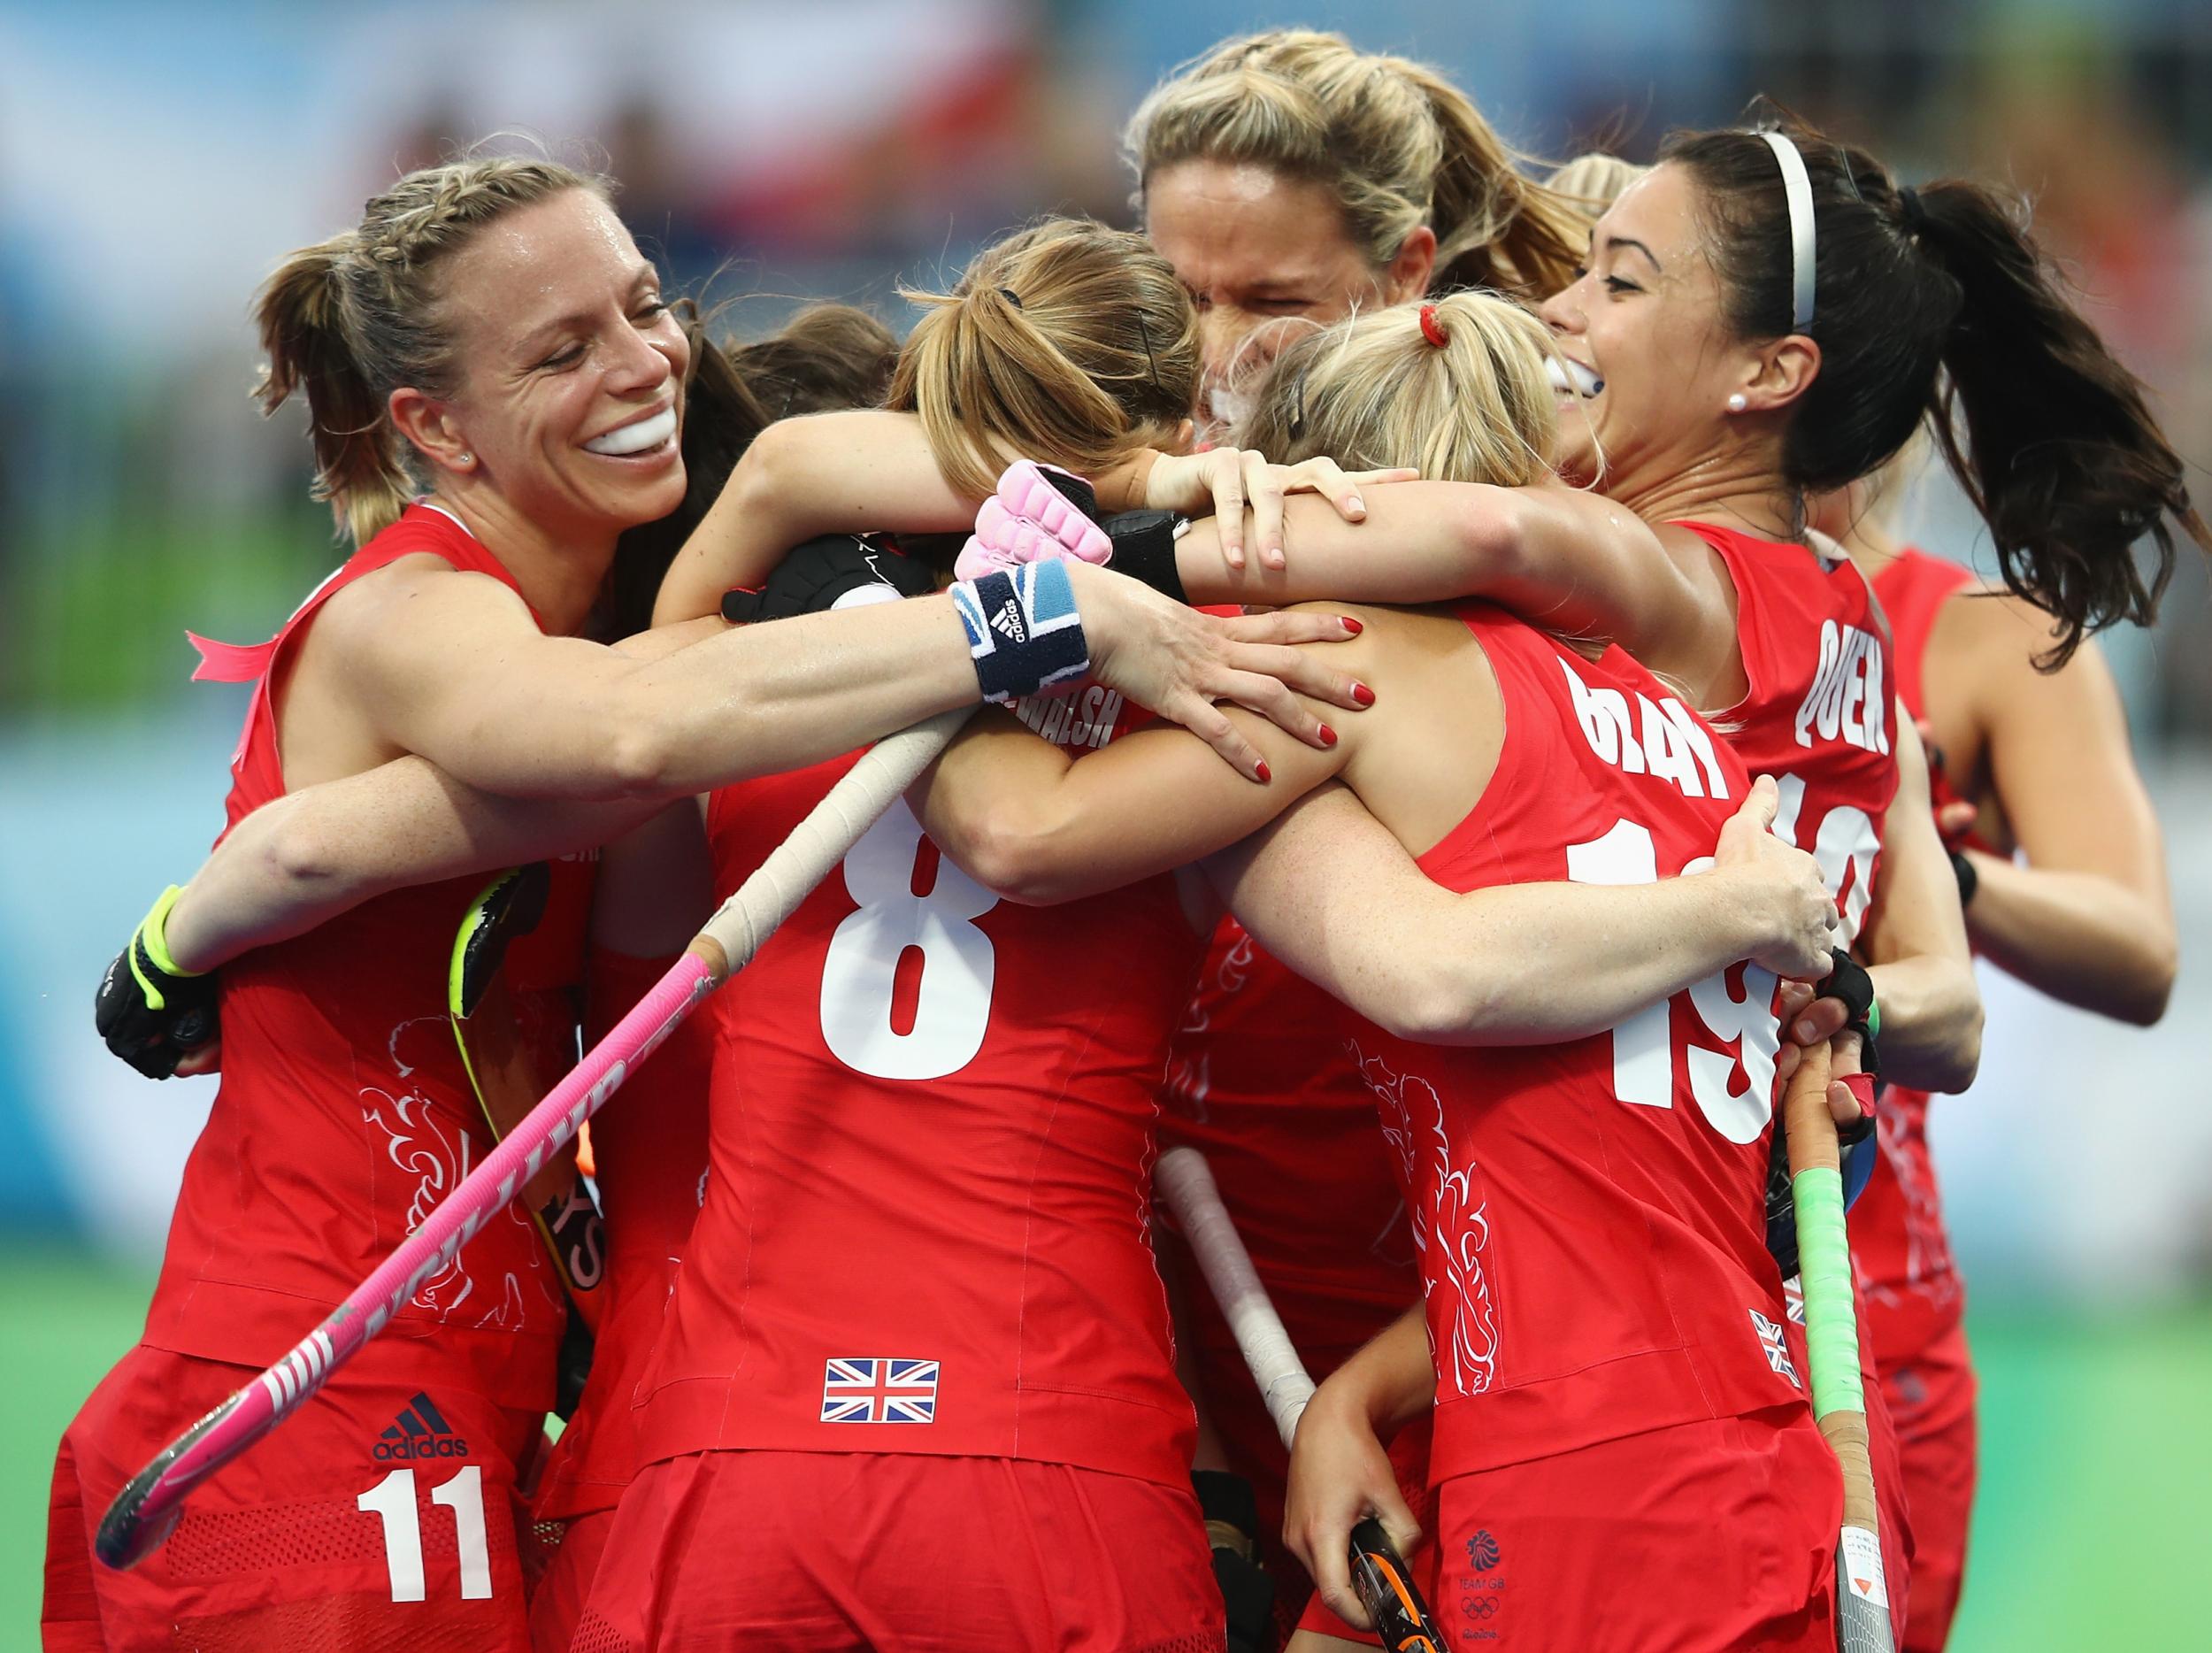 What Happened To Team Gbs Rio Olympics Hockey Champions The Independent The Independent